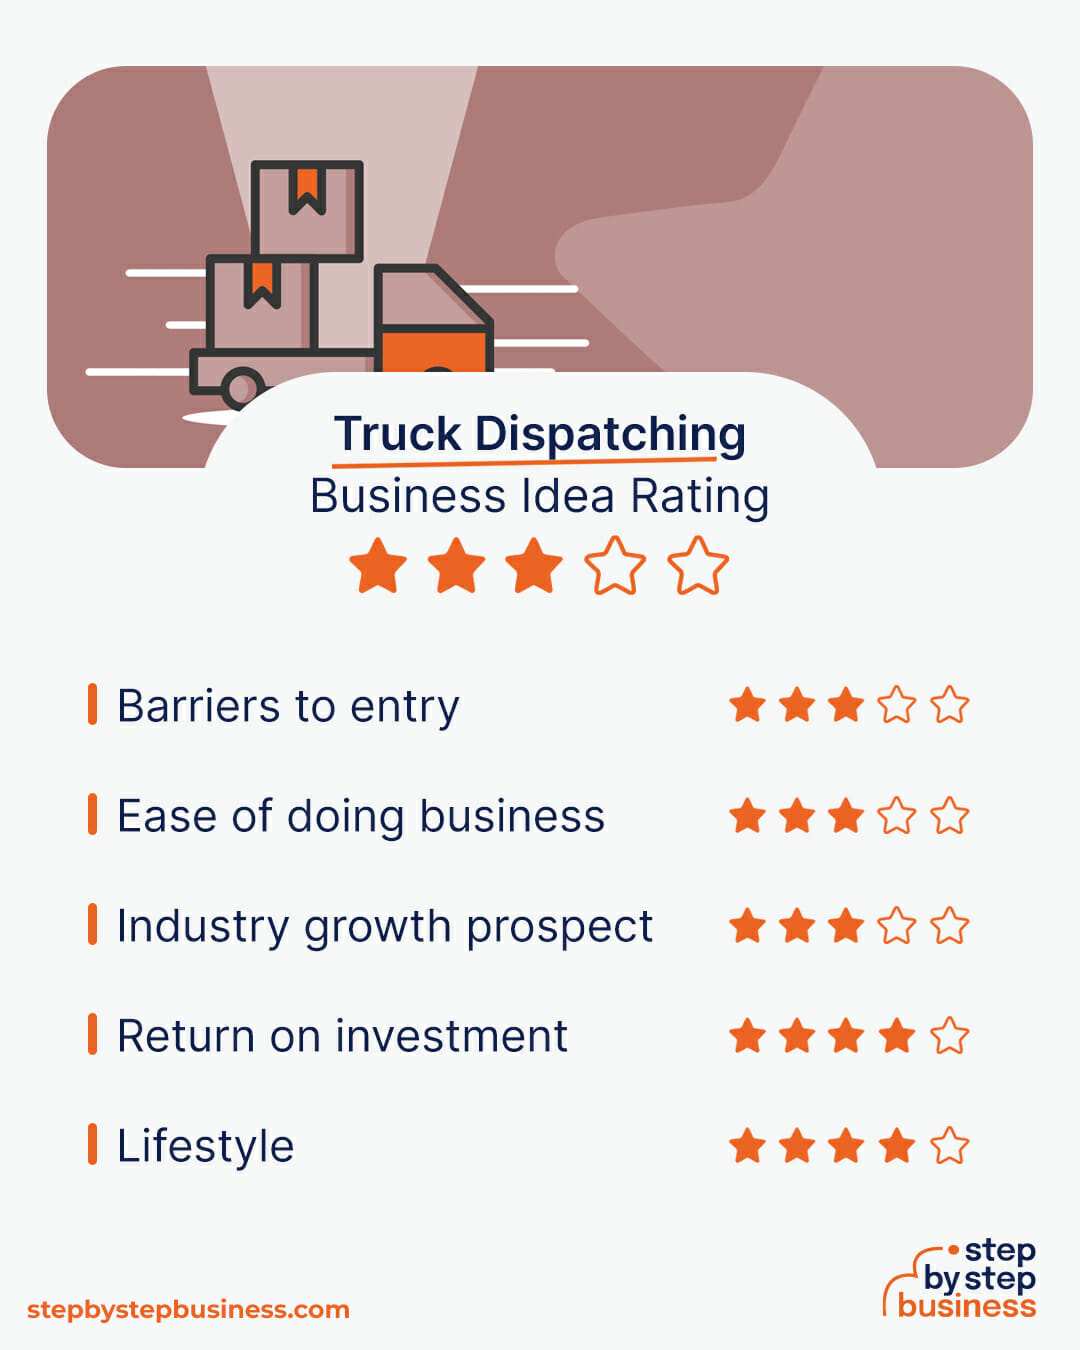 Truck Dispatching Business idea rating